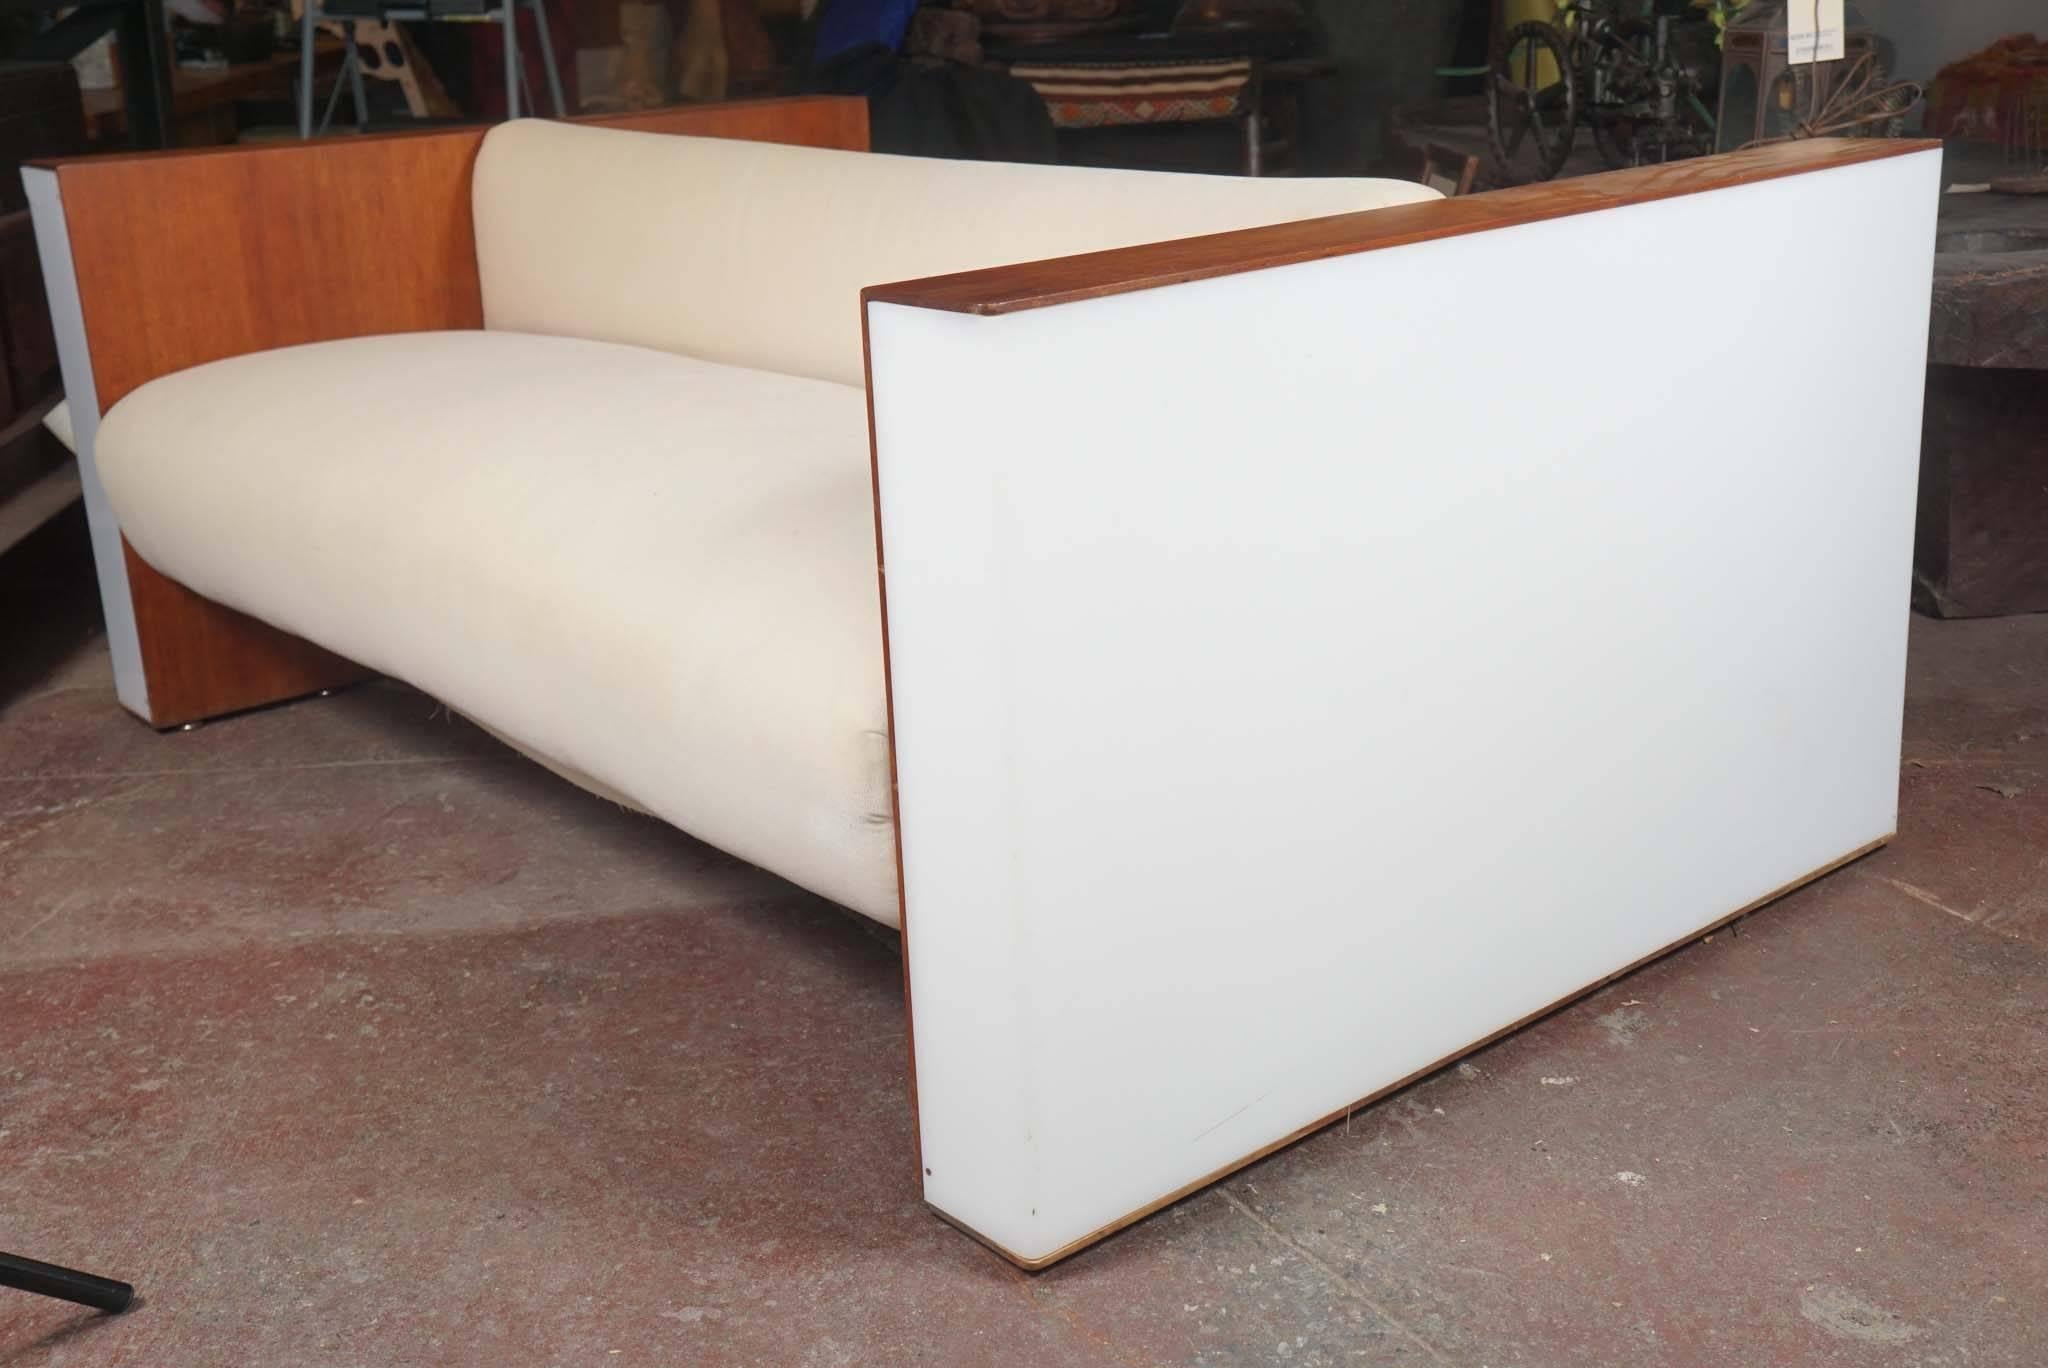 double sided loveseat